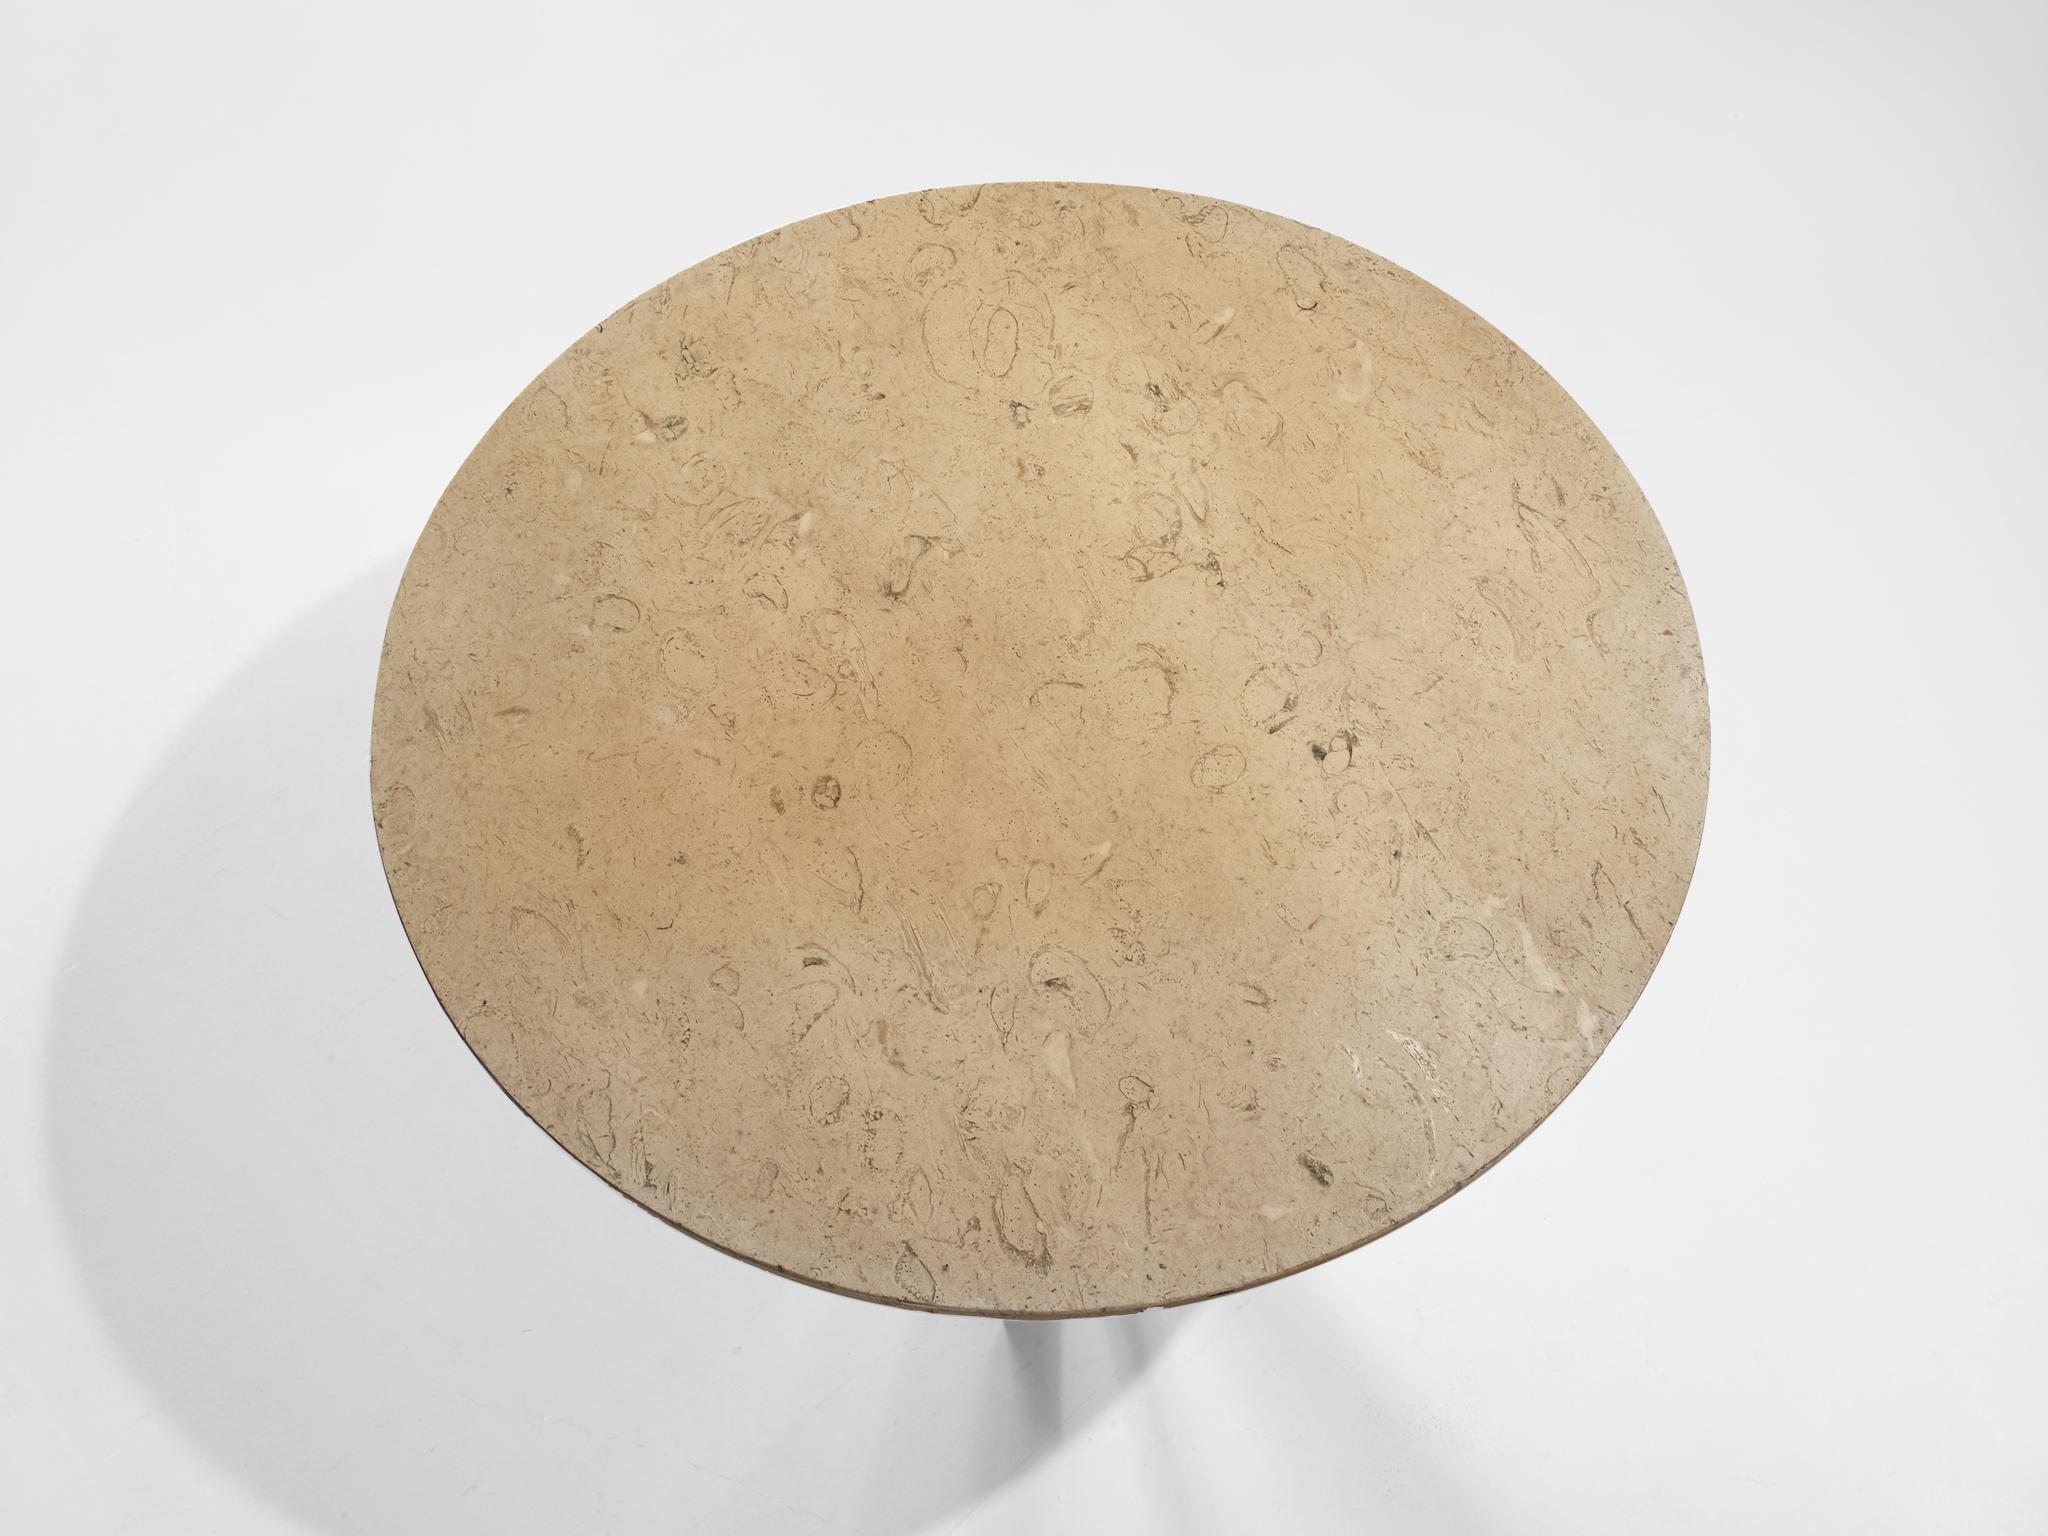 Metal Architectural Coffee Table in Bianco Perlato Marble  For Sale